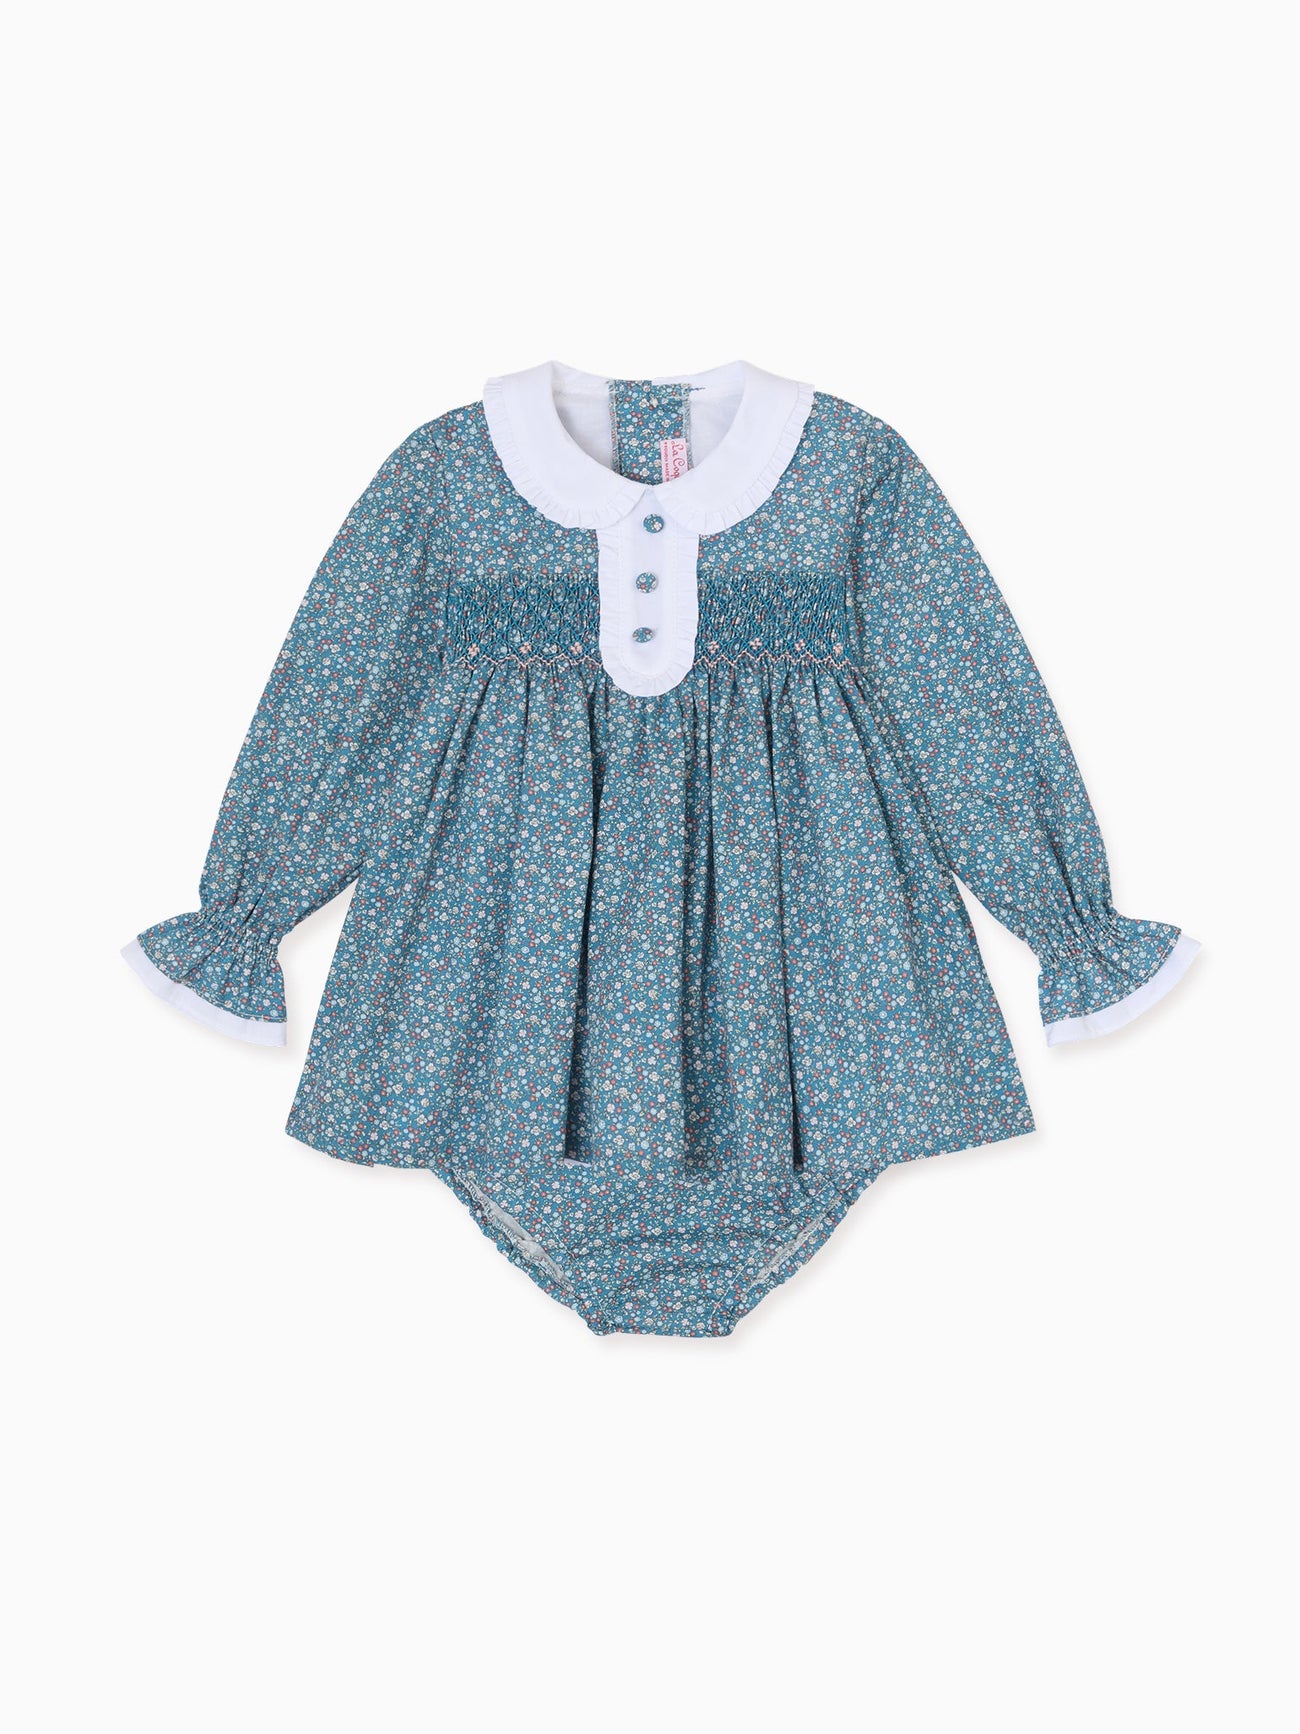 Navy Floral Eugenia Baby Girl Hand-Smocked Set